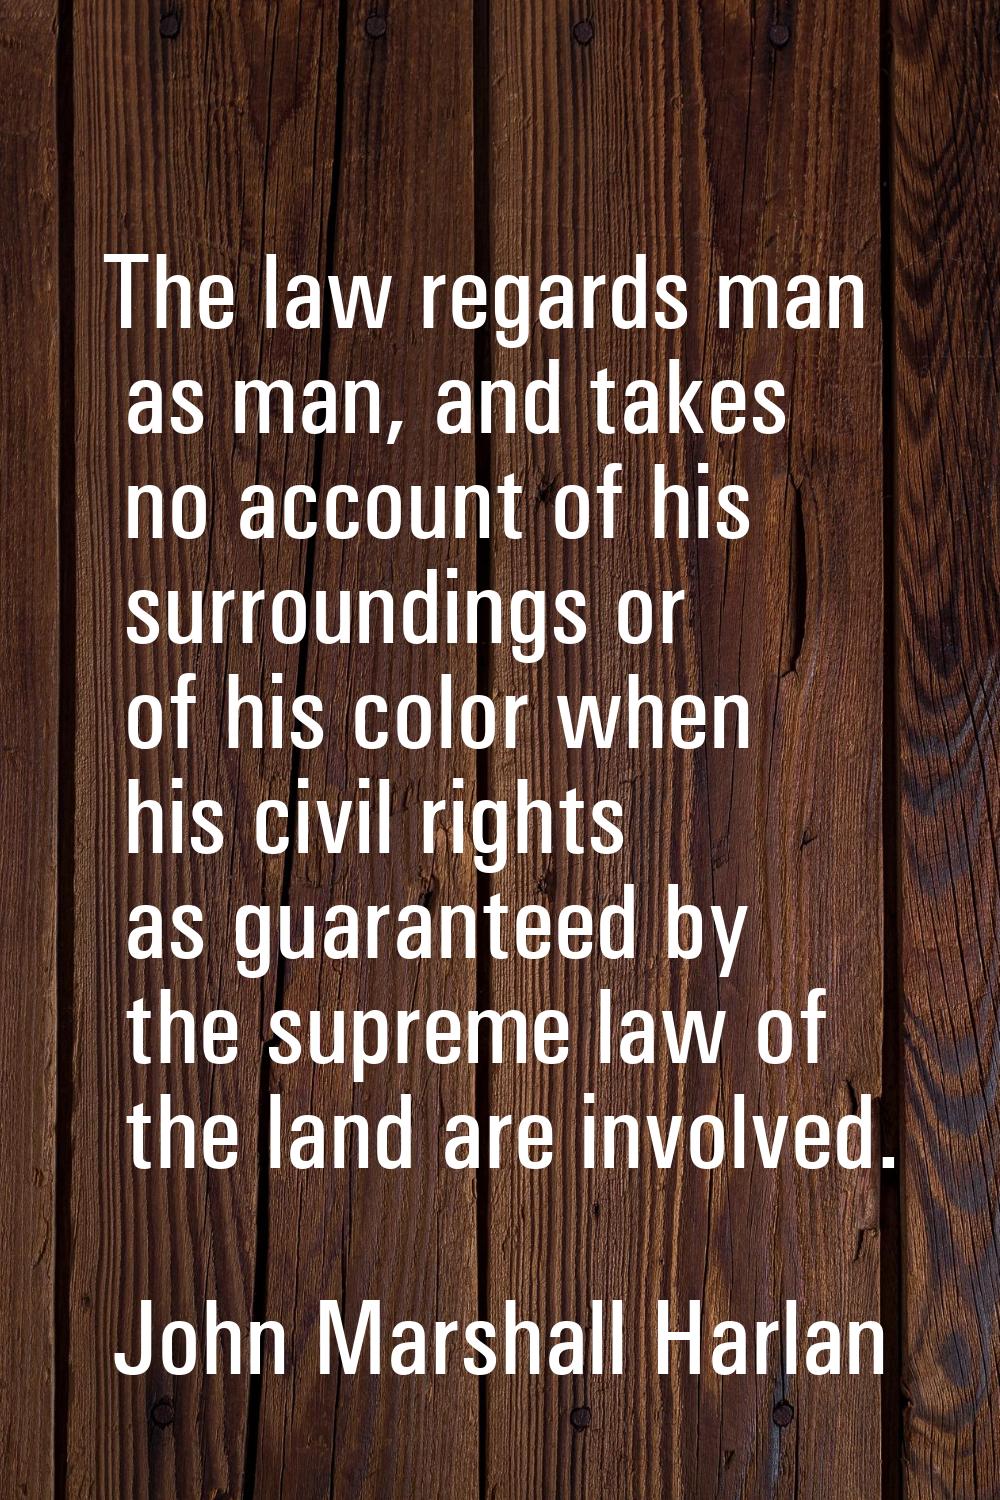 The law regards man as man, and takes no account of his surroundings or of his color when his civil